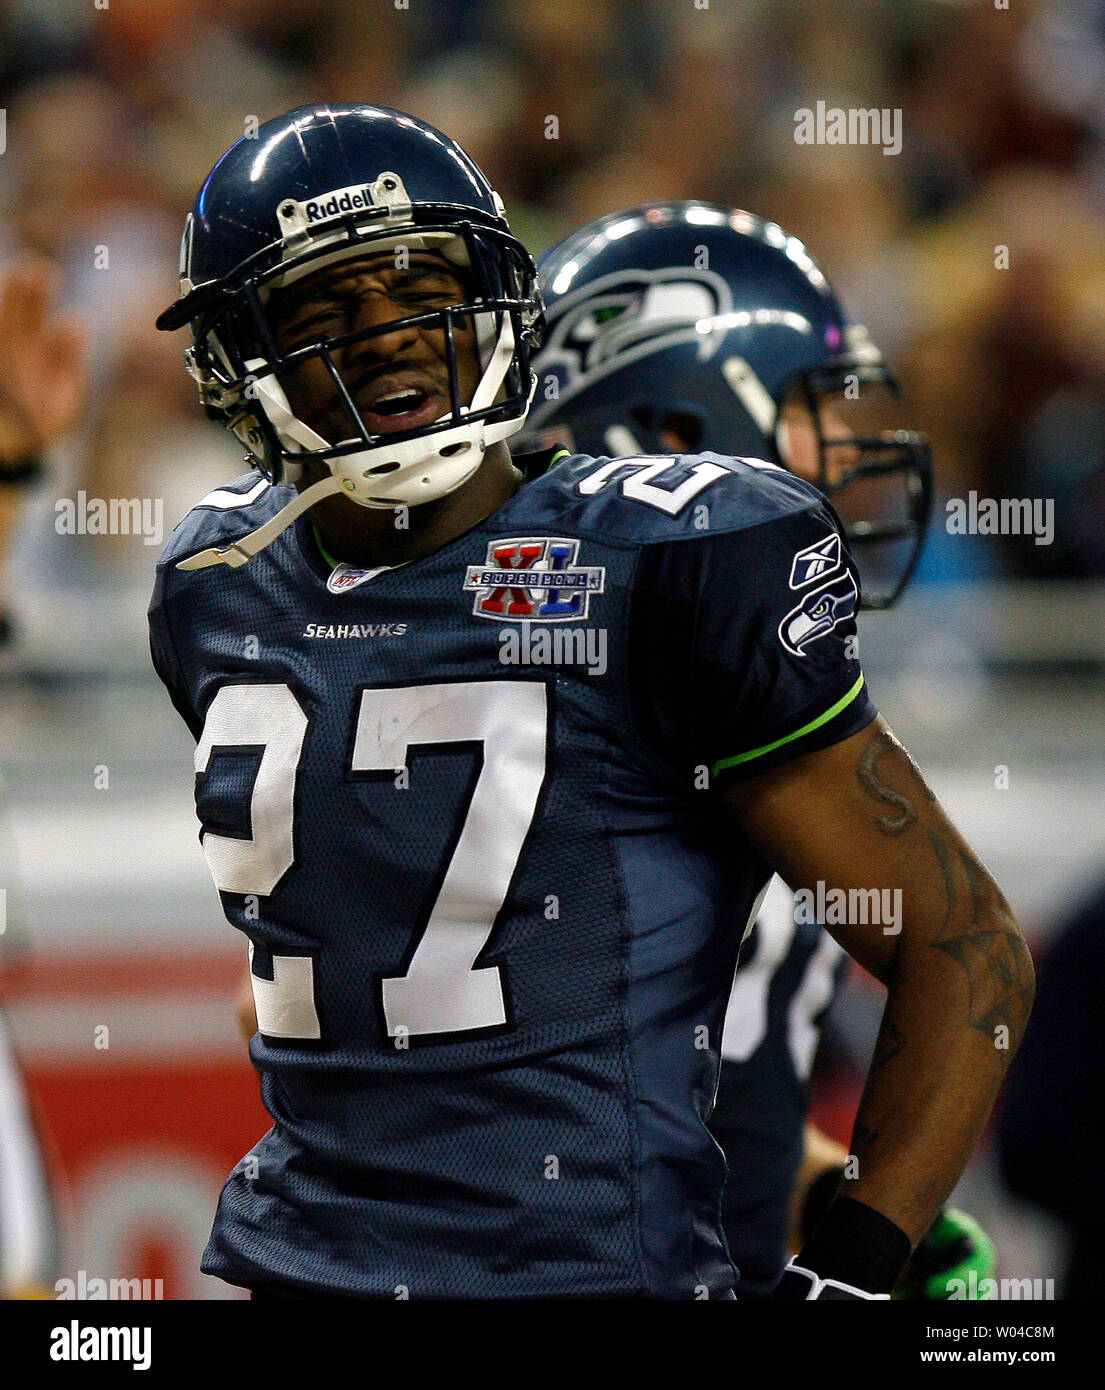 Seattle Seahawks cornerback Jordan Babineaux disagrees with a call in the  second half of Super Bowl XL featuring the Seattle Seahawks and the  Pittsburgh Steelers at Ford Field in Detroit, Mi., on